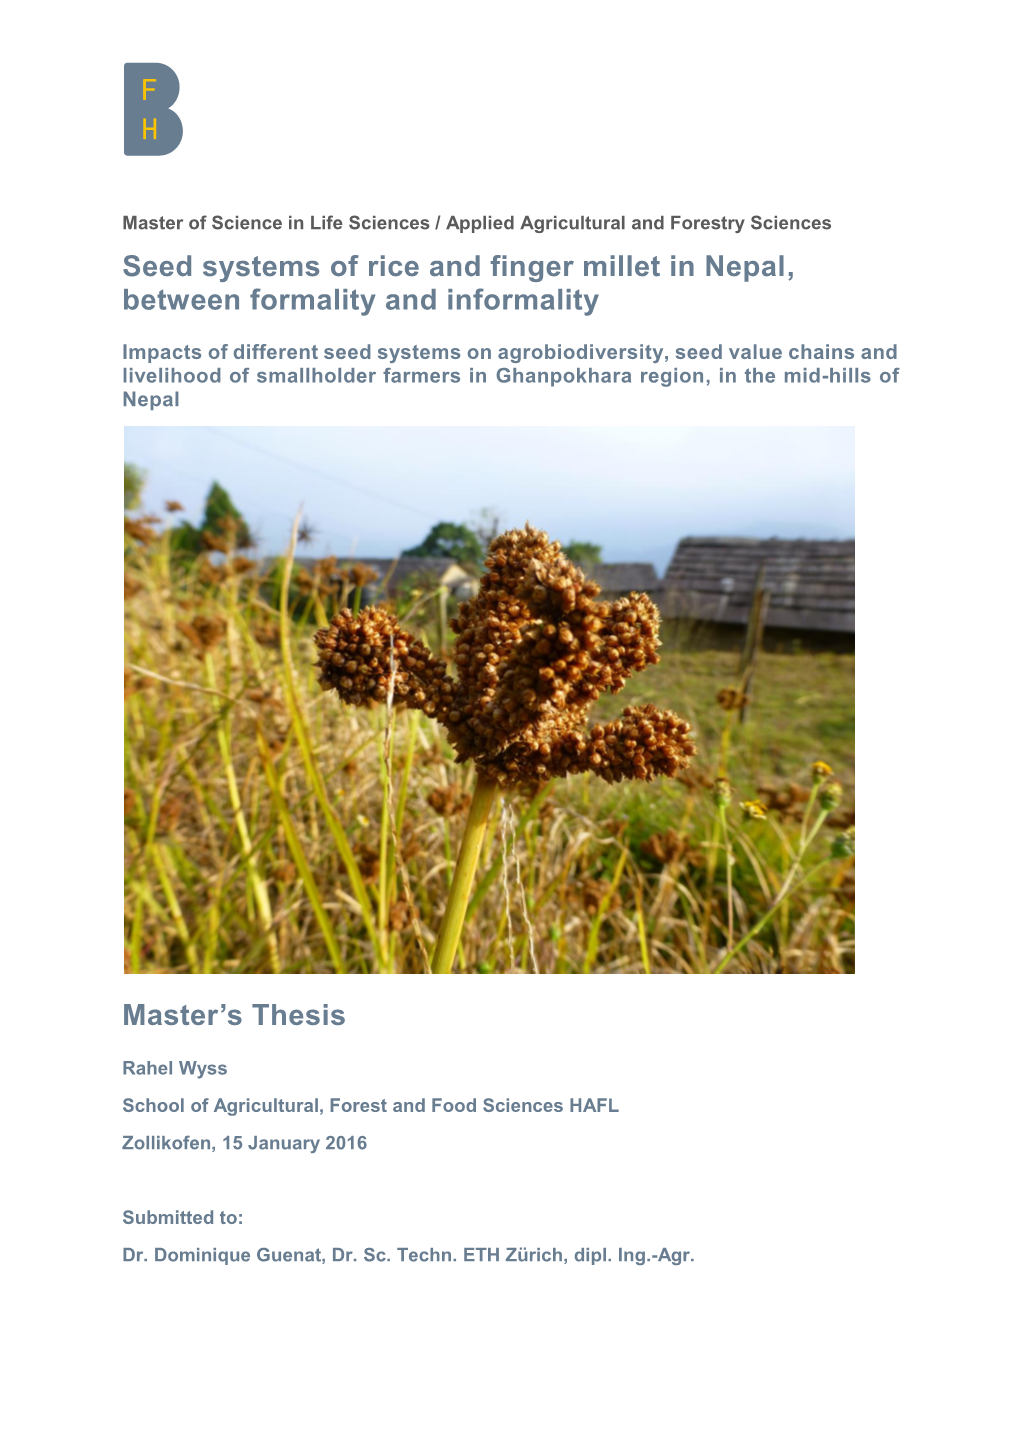 Seed Systems of Rice and Finger Millet in Nepal, Between Formality and Informality